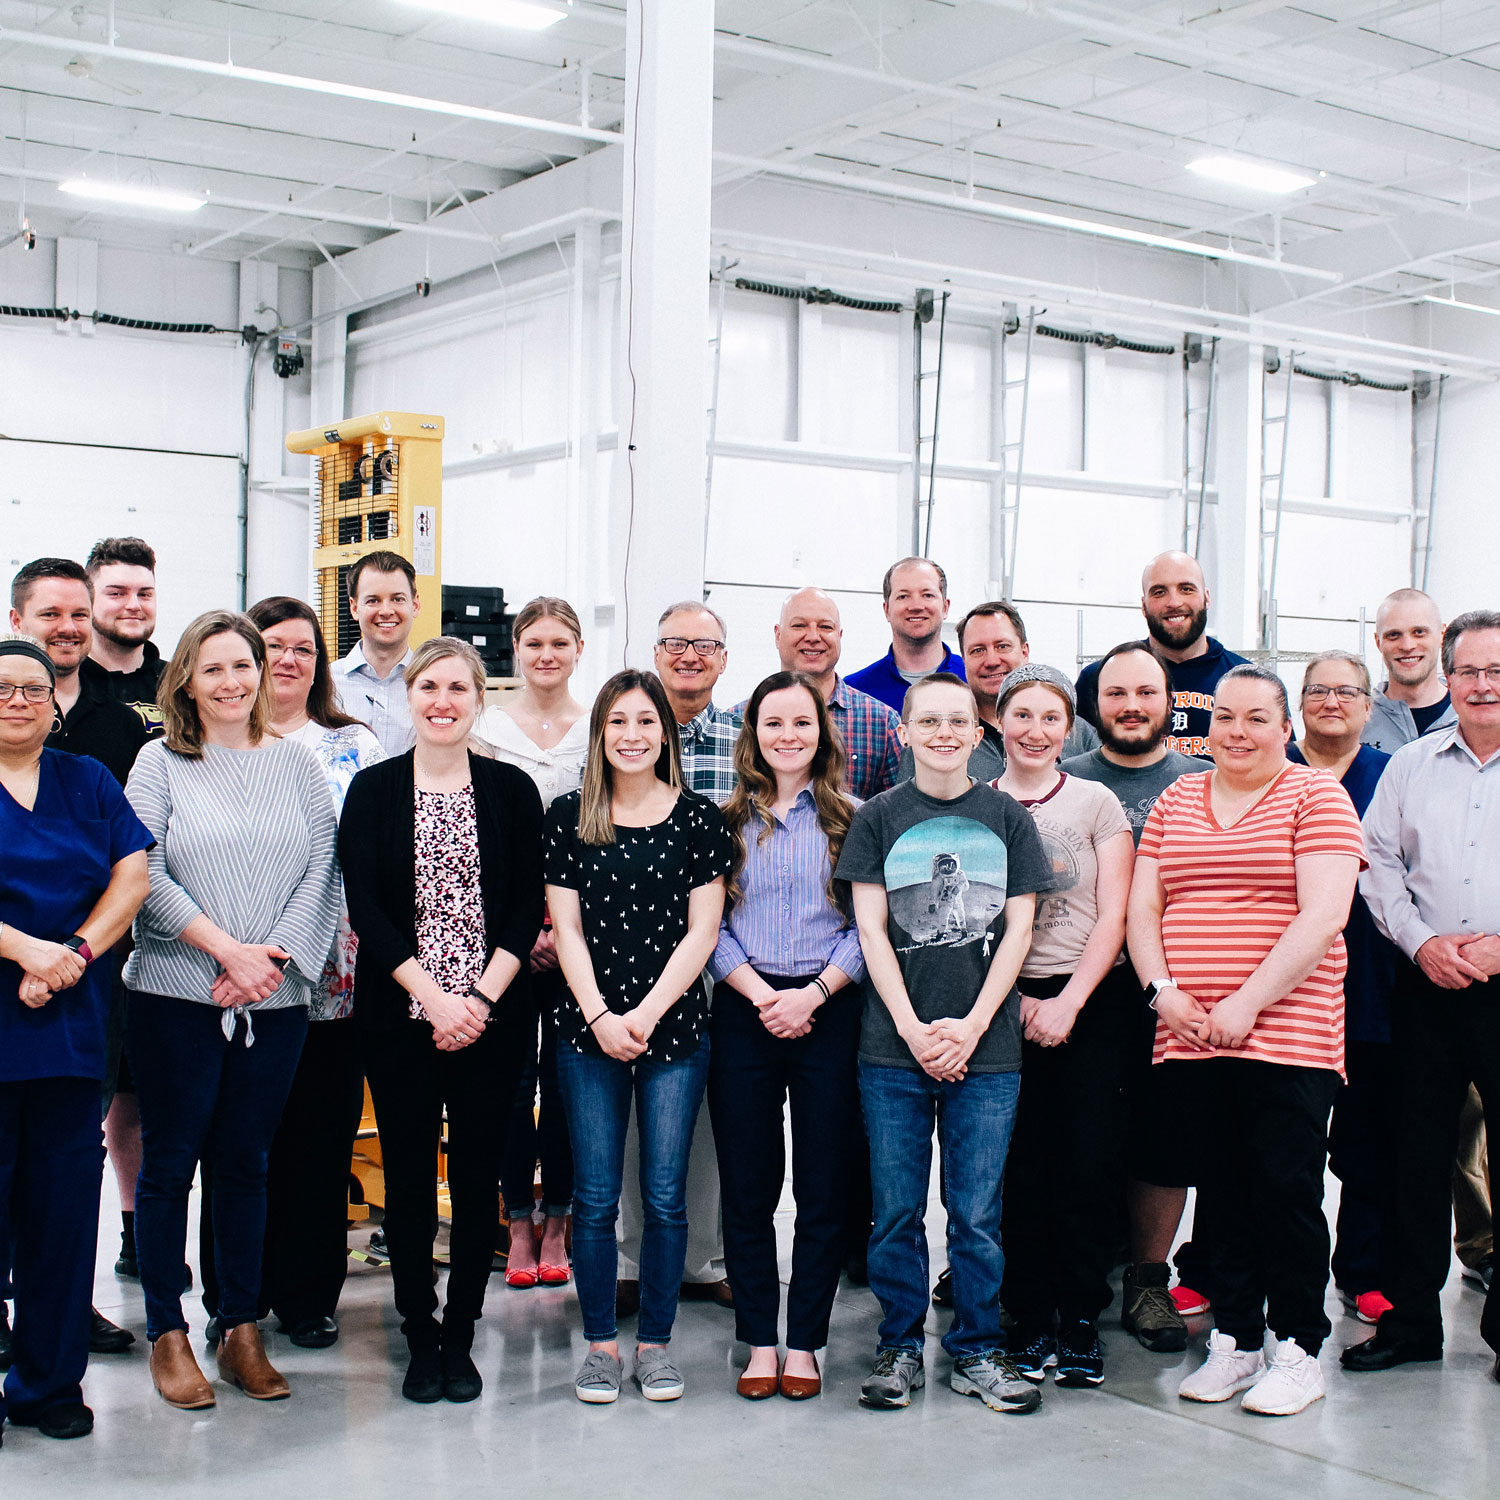 A photo of the MediSurge team posed in the lab, their arms crossed in front.